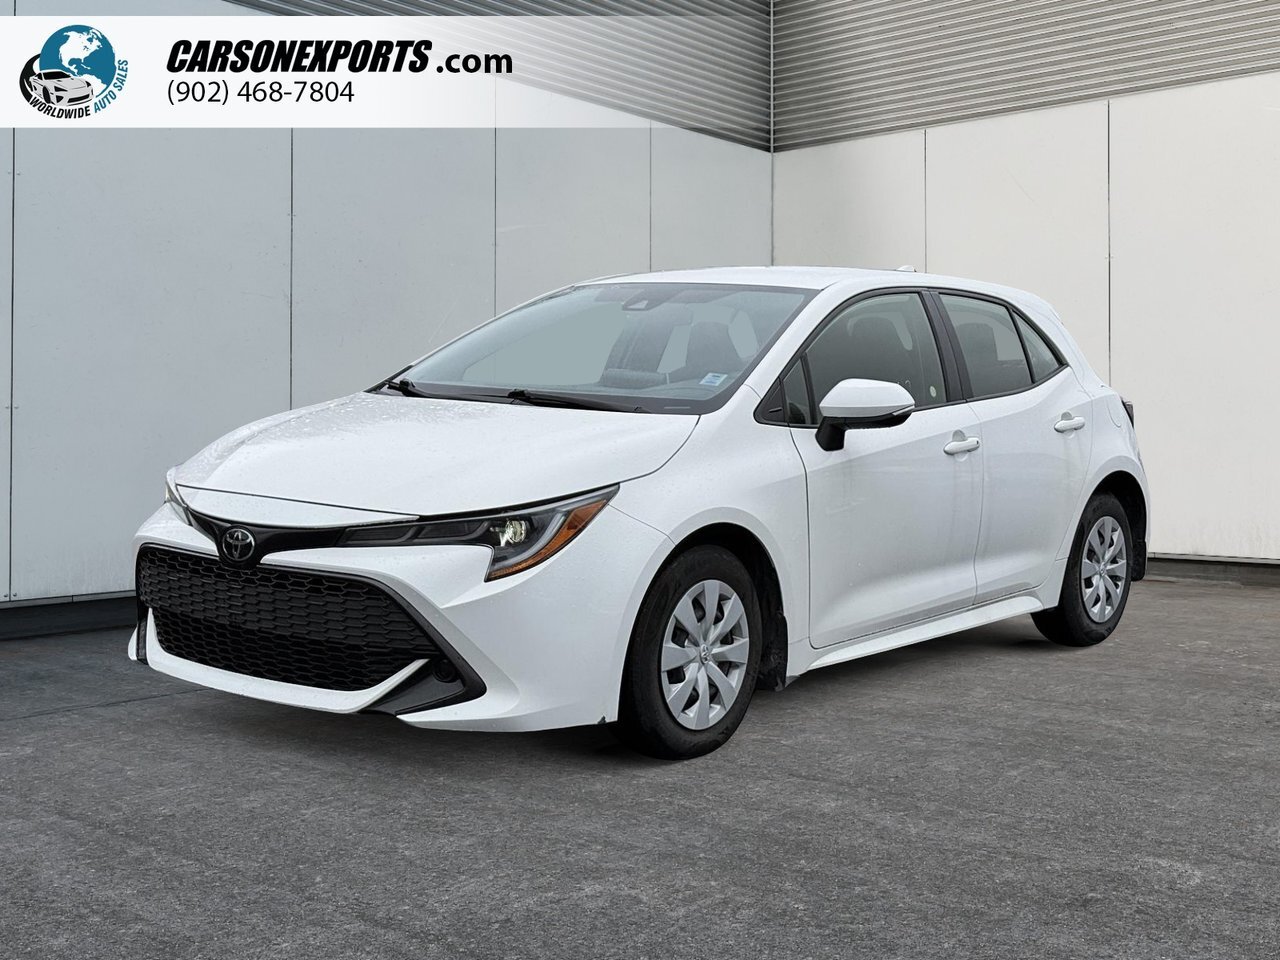 2021 Toyota Corolla Hatchback Base The best place to buy a used car. Period.